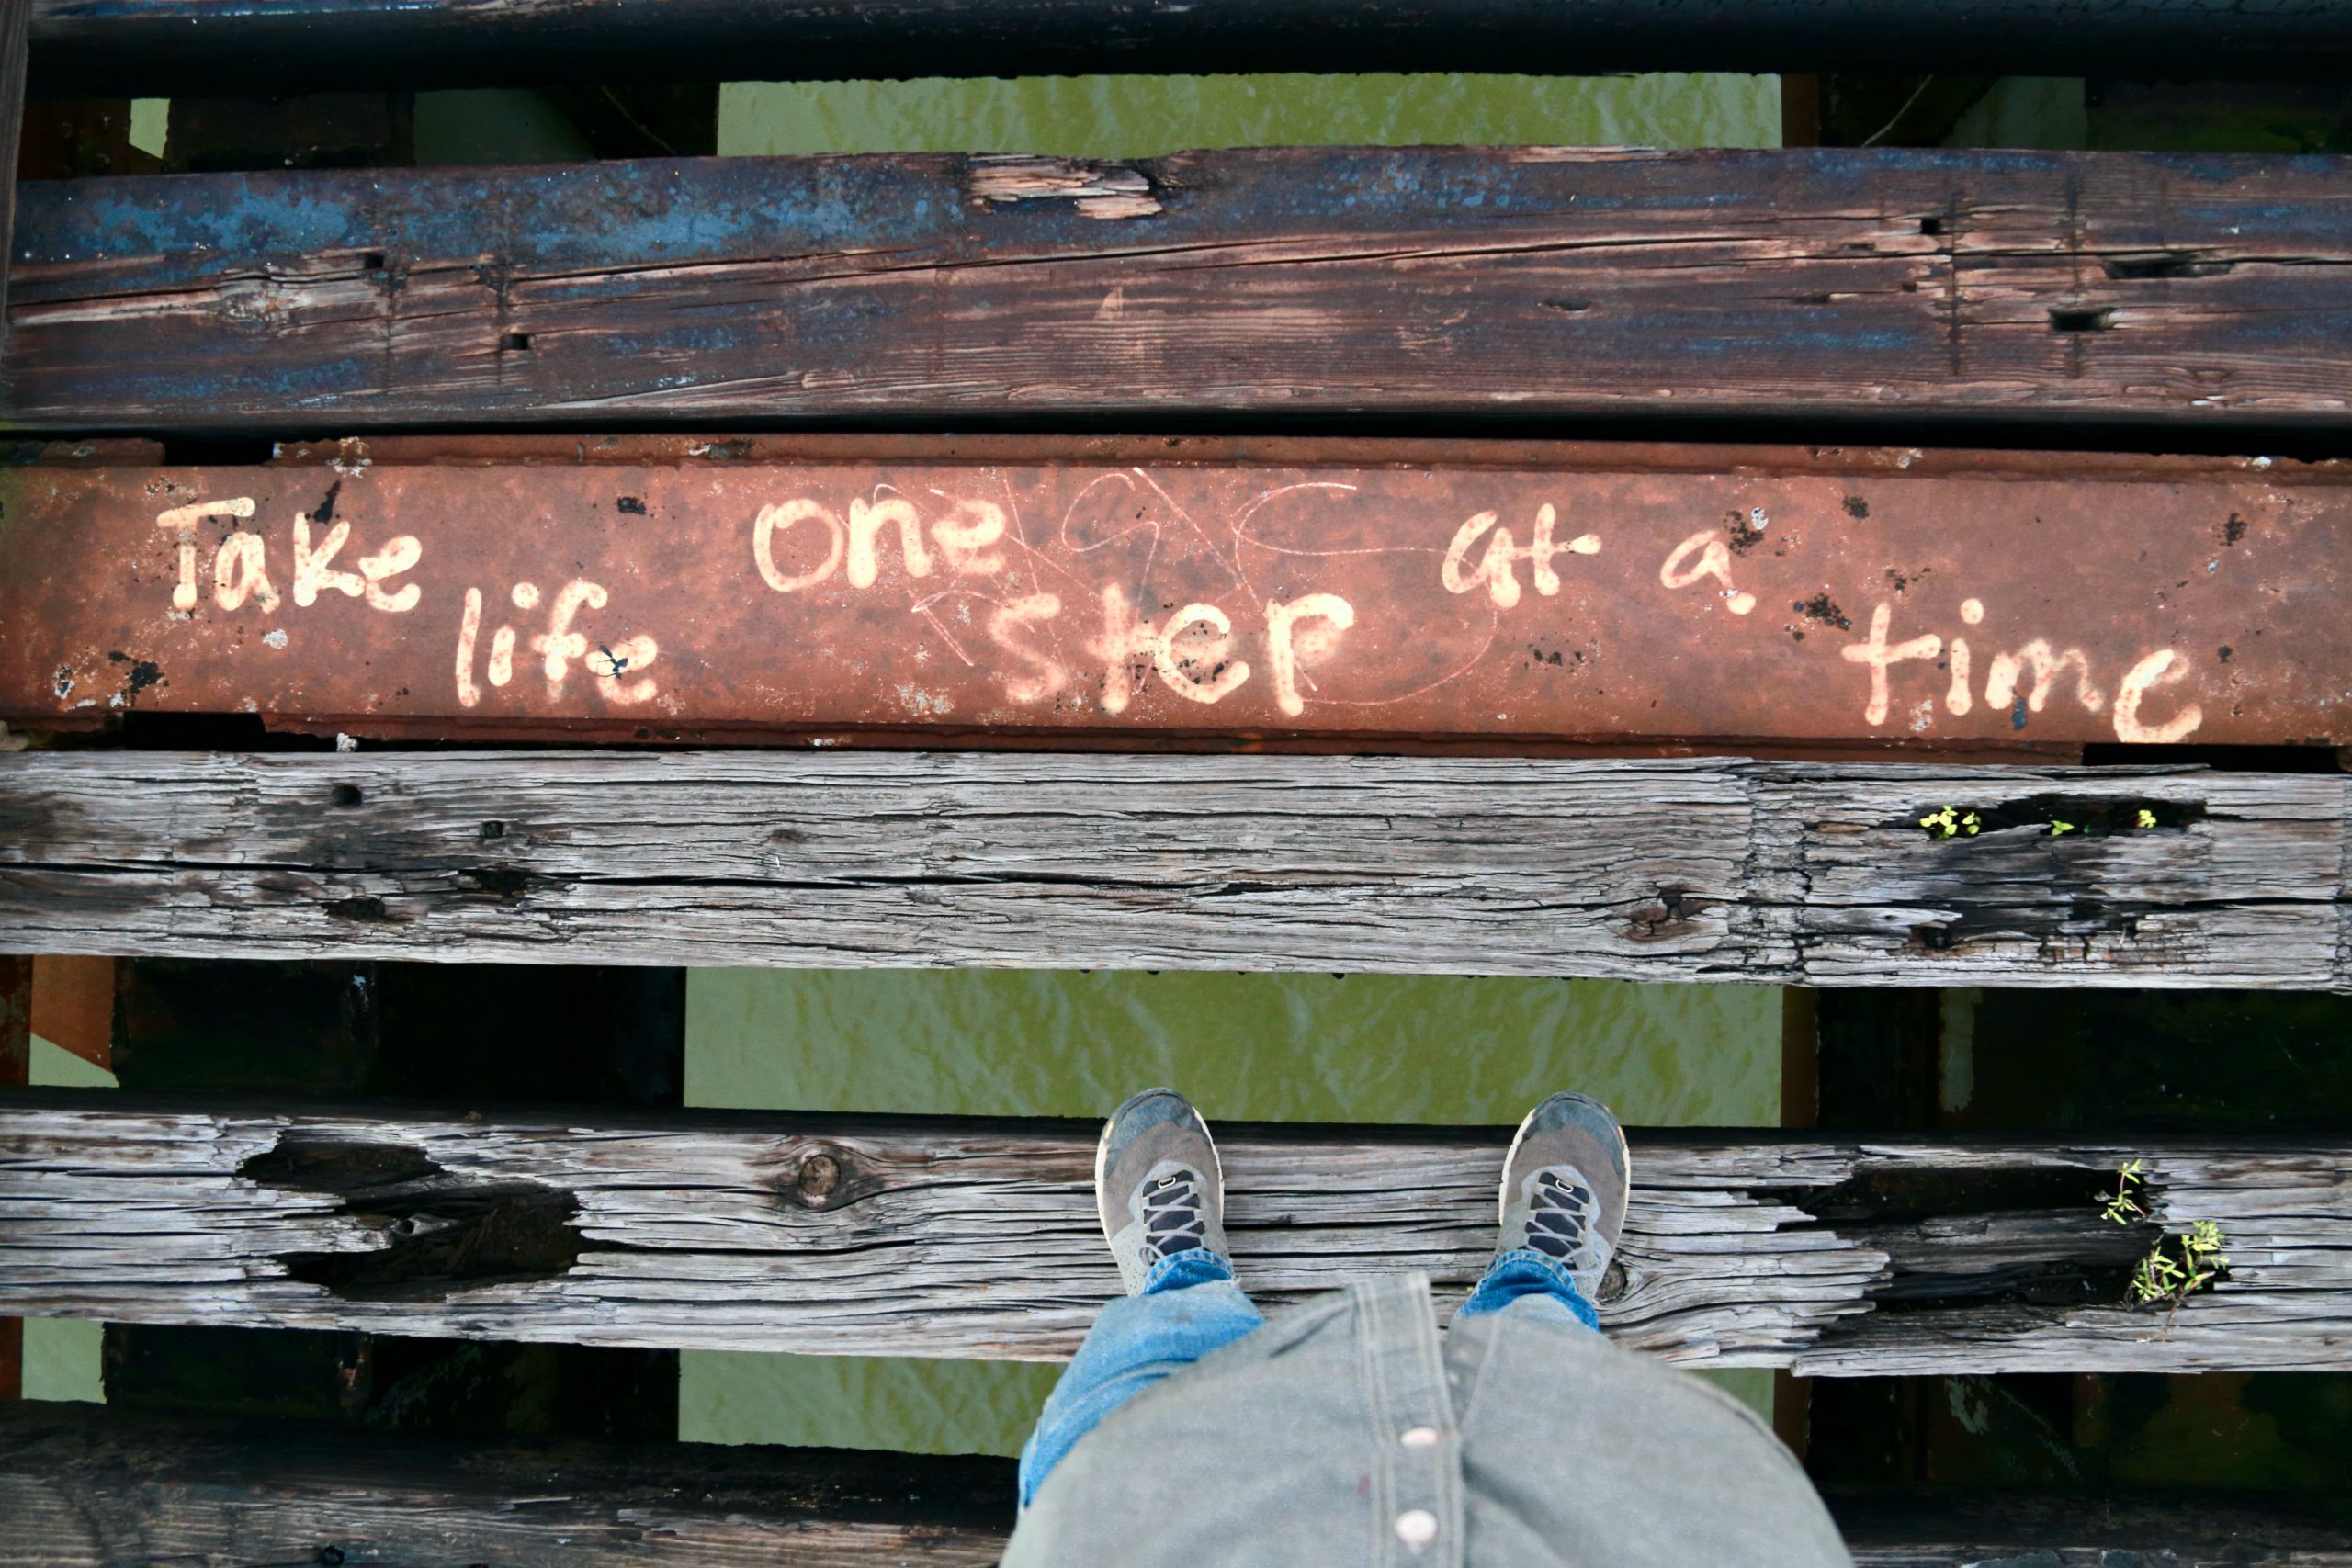 wooden plank that reads "take life one step at a time"